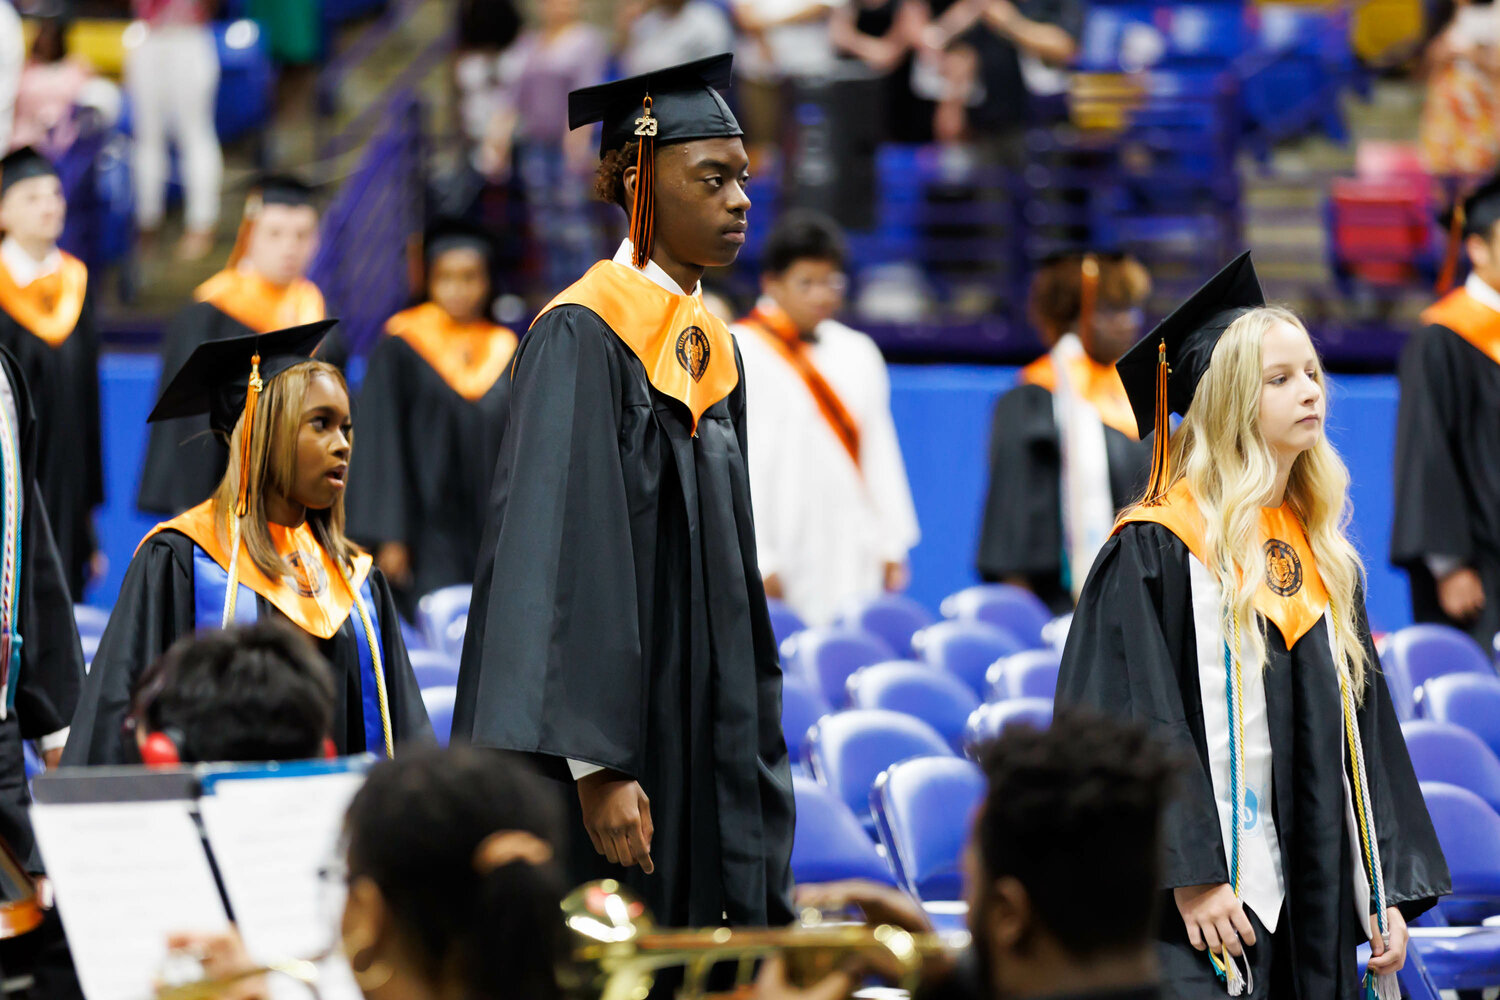 South View High School held its 2023 commencement Tuesday at the Crown Coliseum.